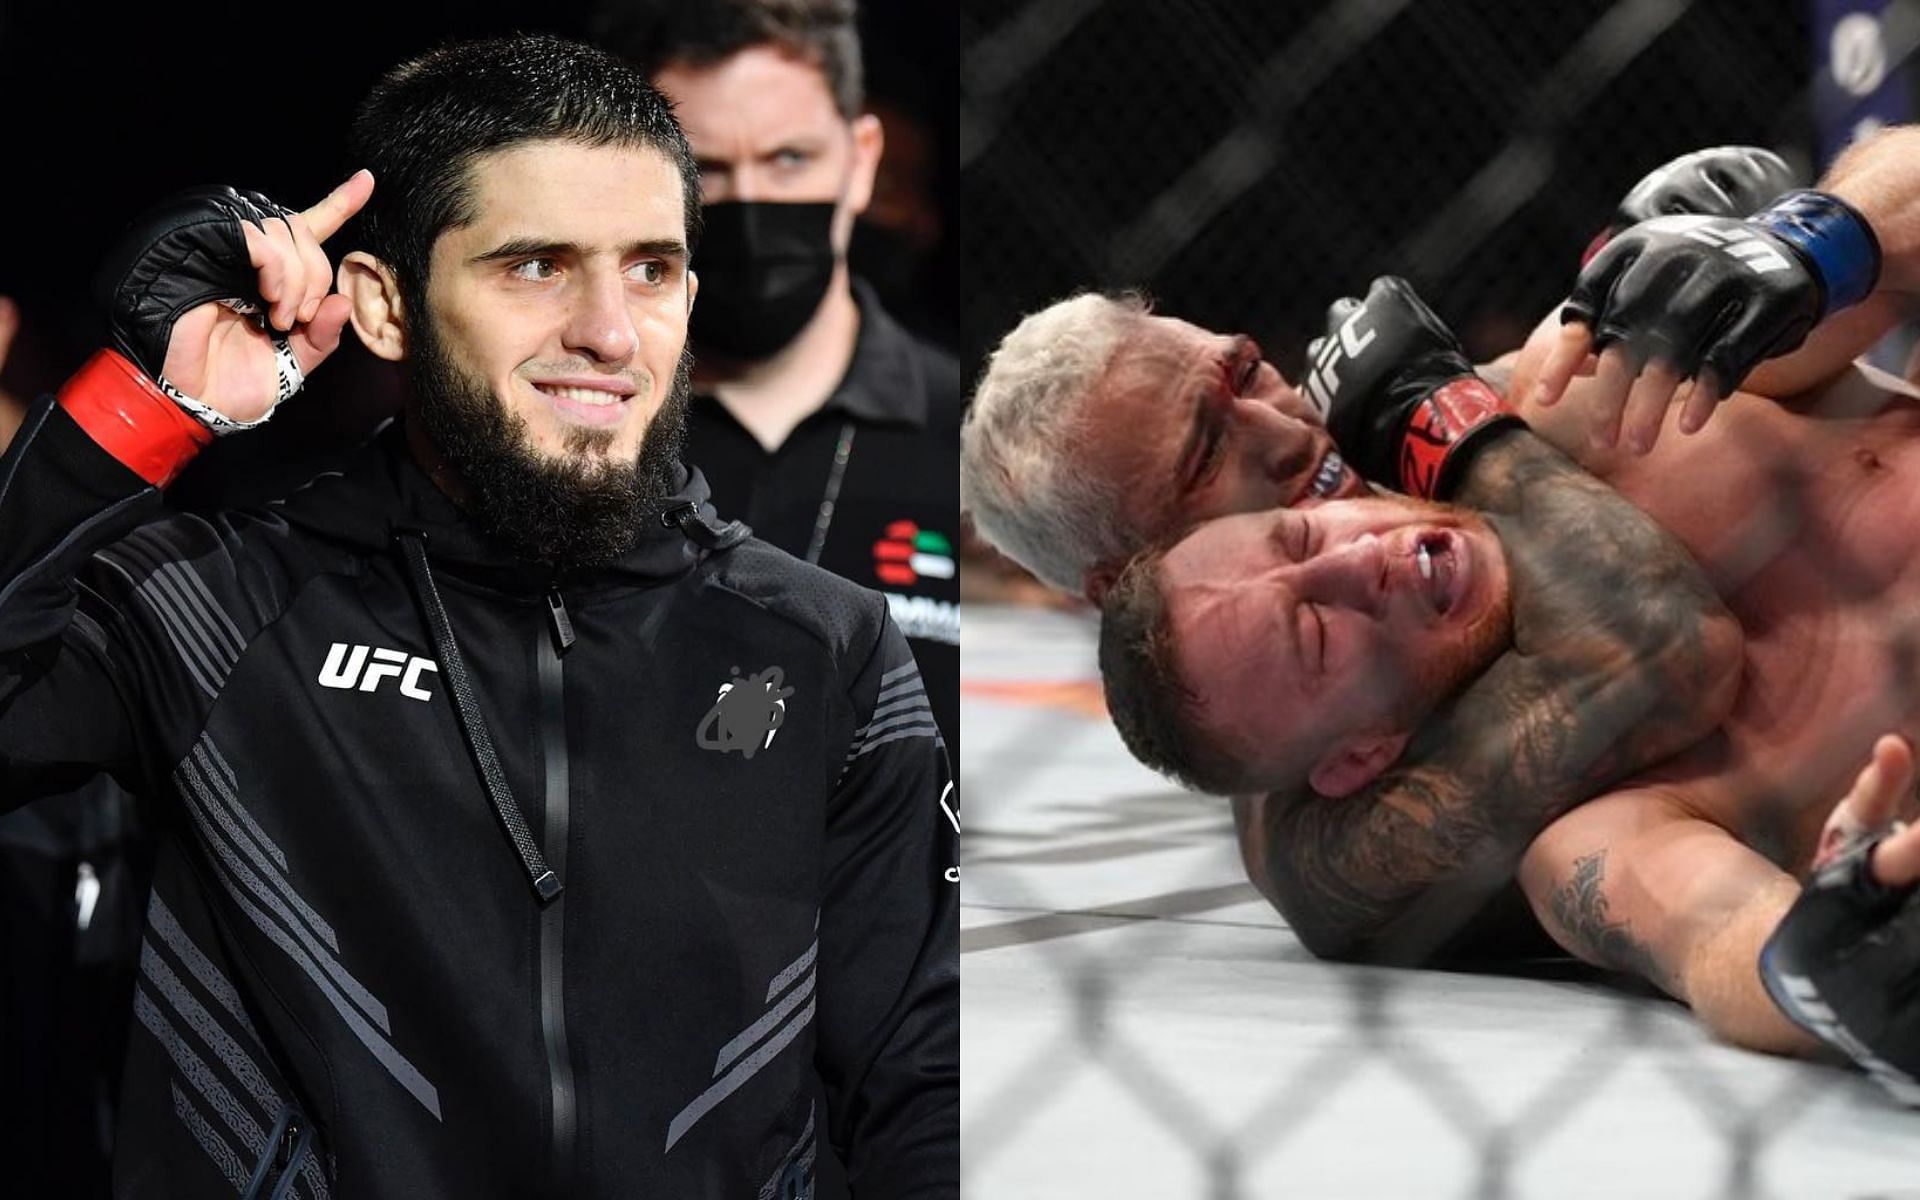 Islam Makhachev (L); Charles Oliveira submitting Justin Gaethje (R) [Images courtesy of @islam_makhachev and @charlesdobronxs Instagram]